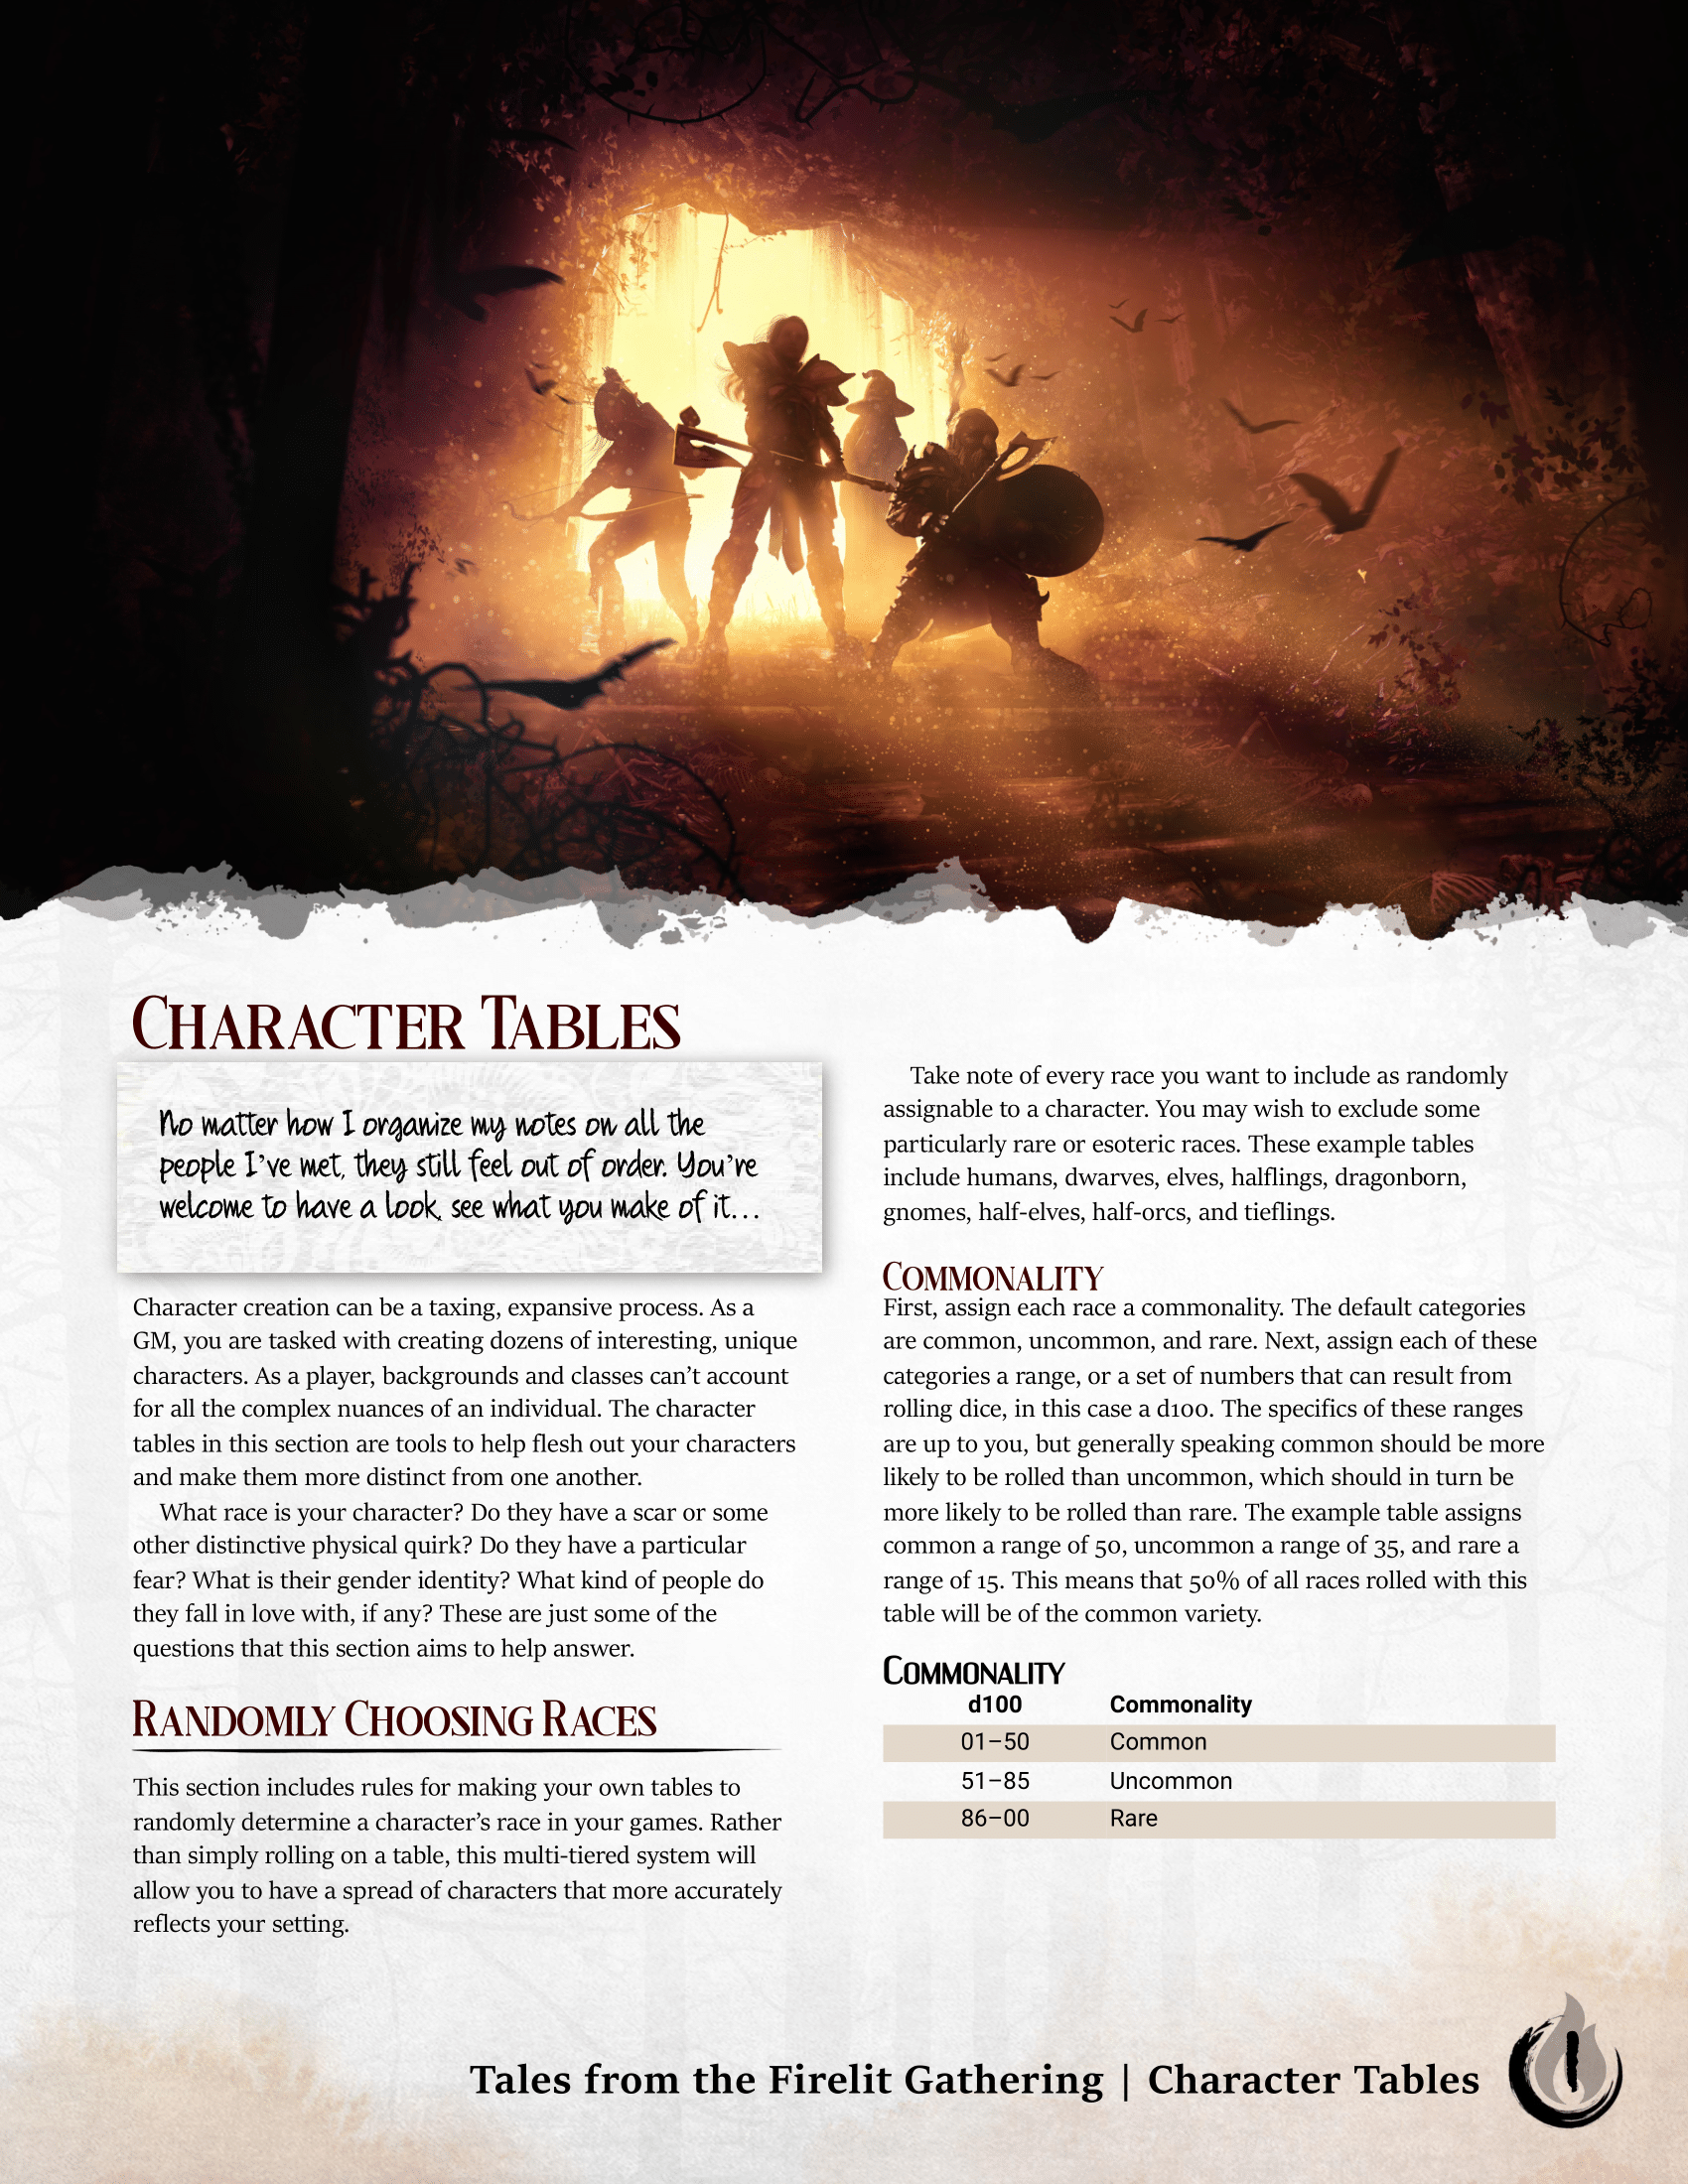 Character Tables (Tales from the Firelit Gathering) - The Homebrewery-1.png